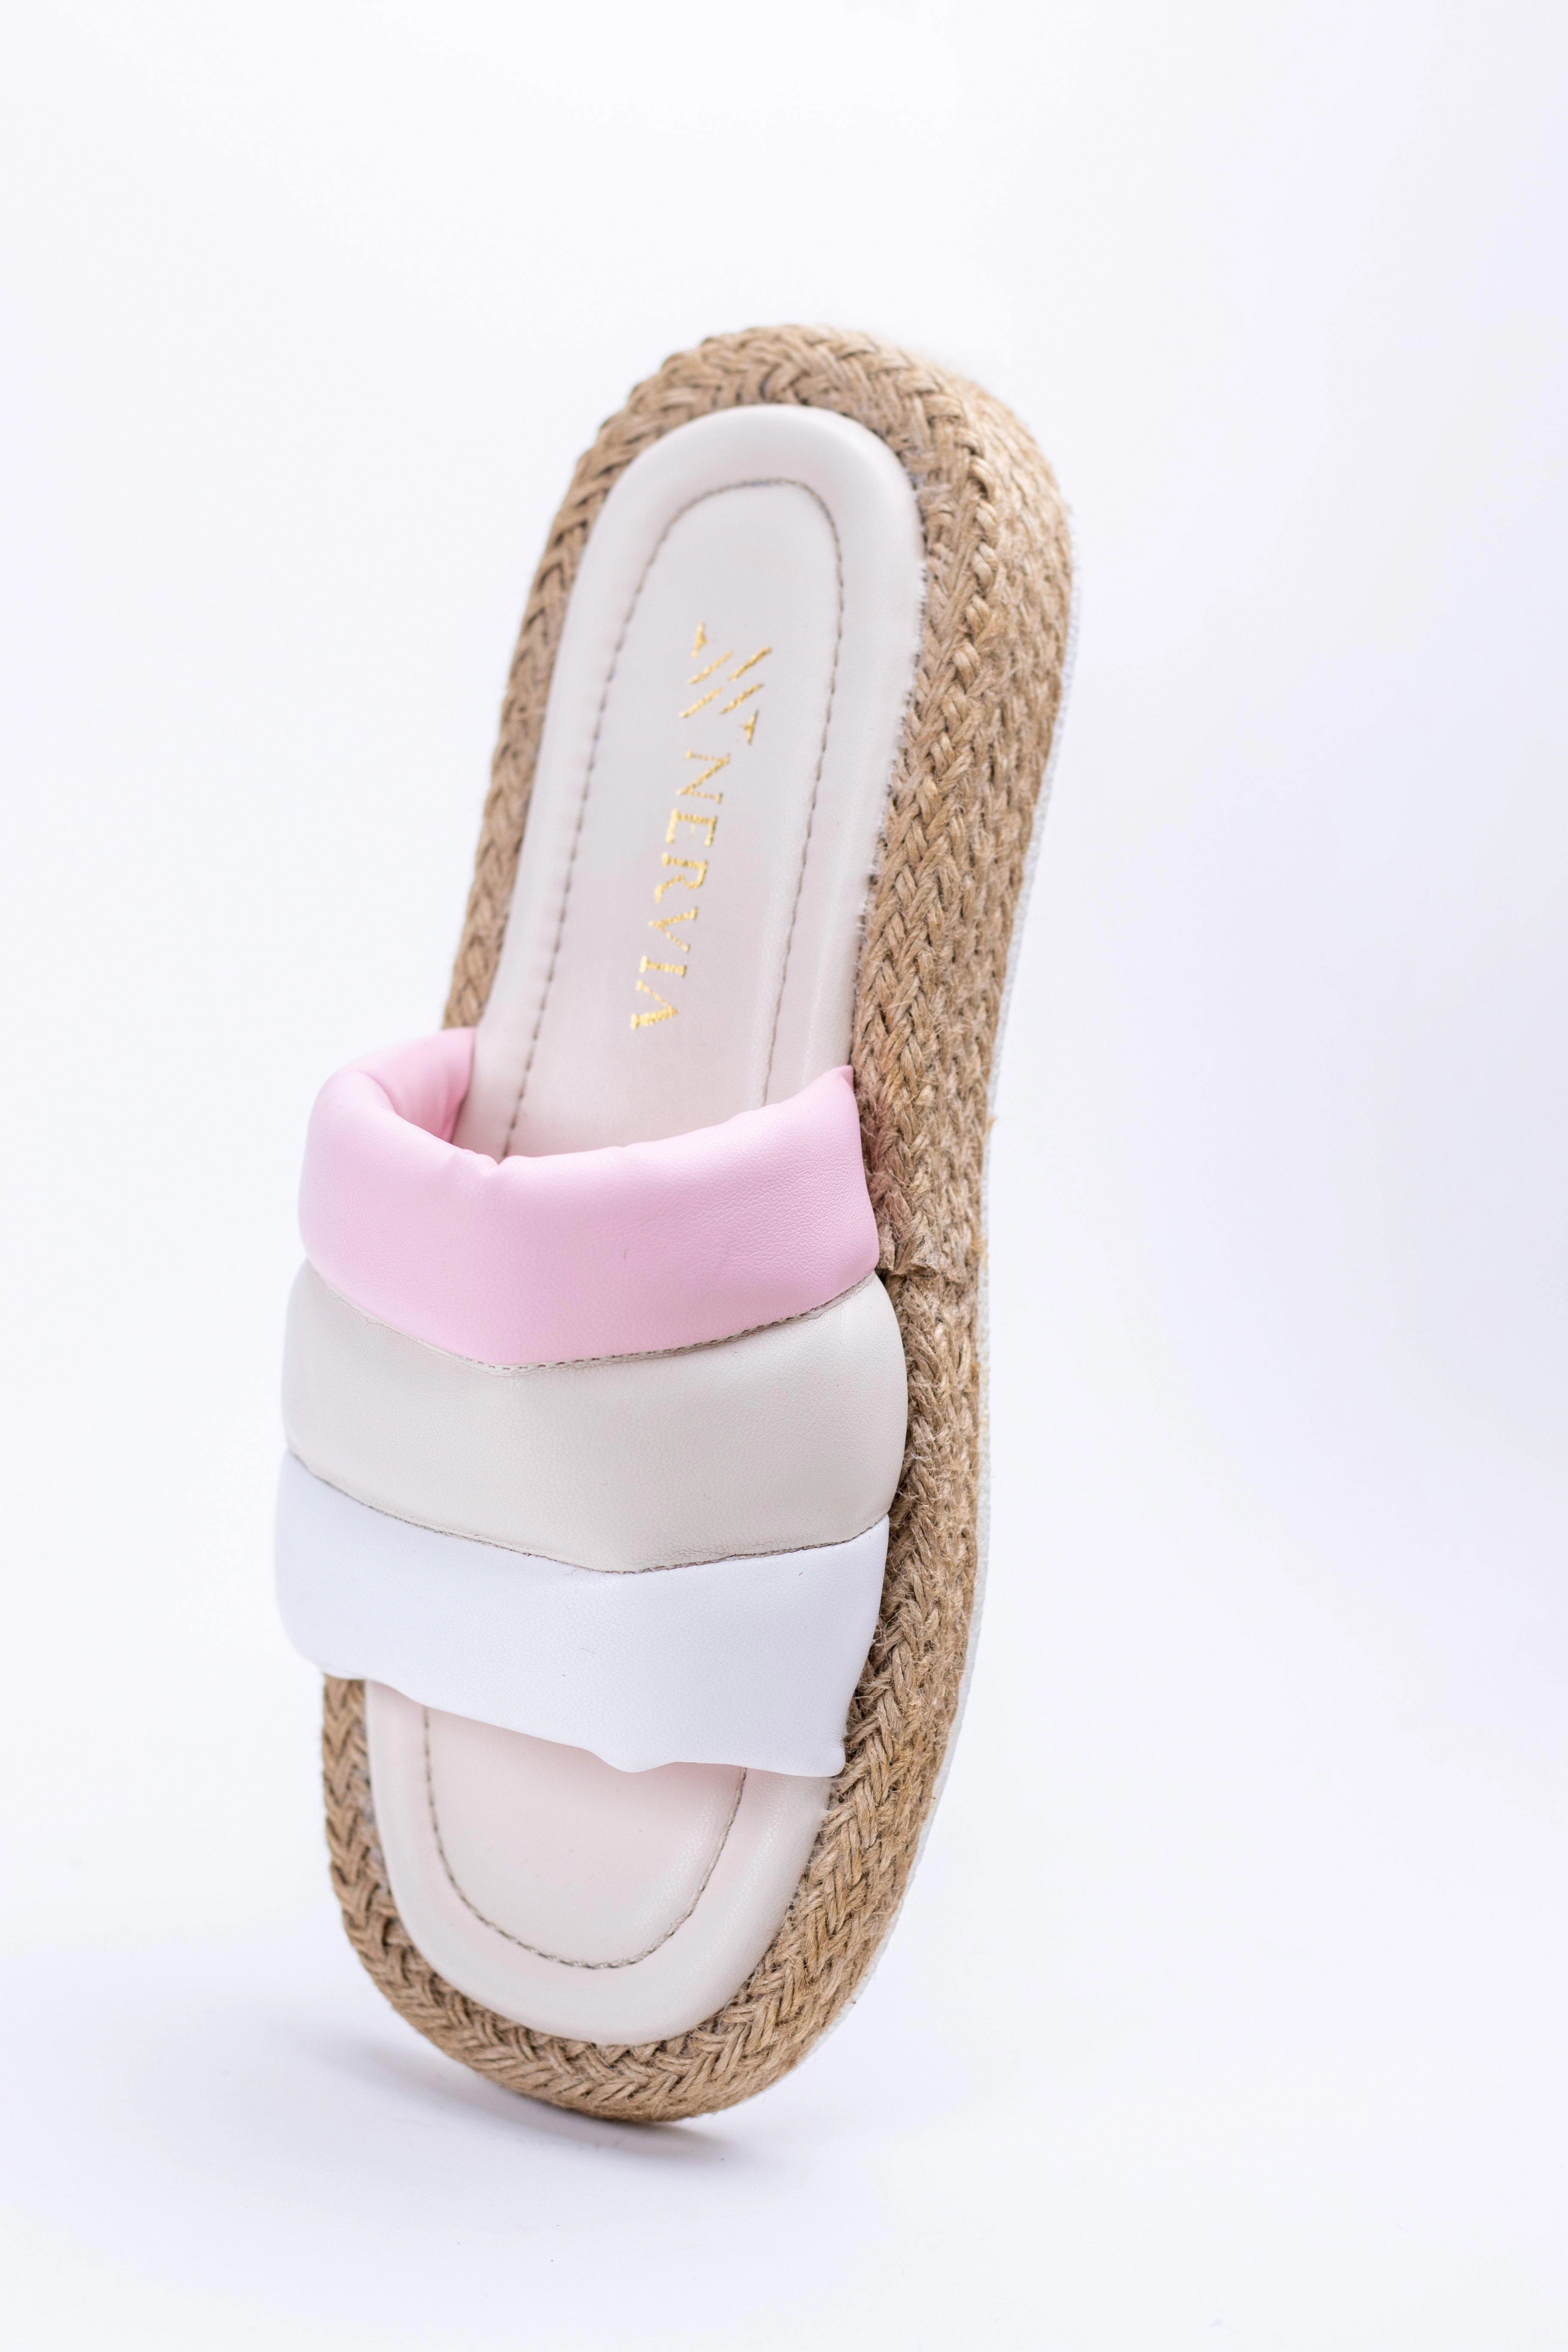 Puffy pink flat slippers